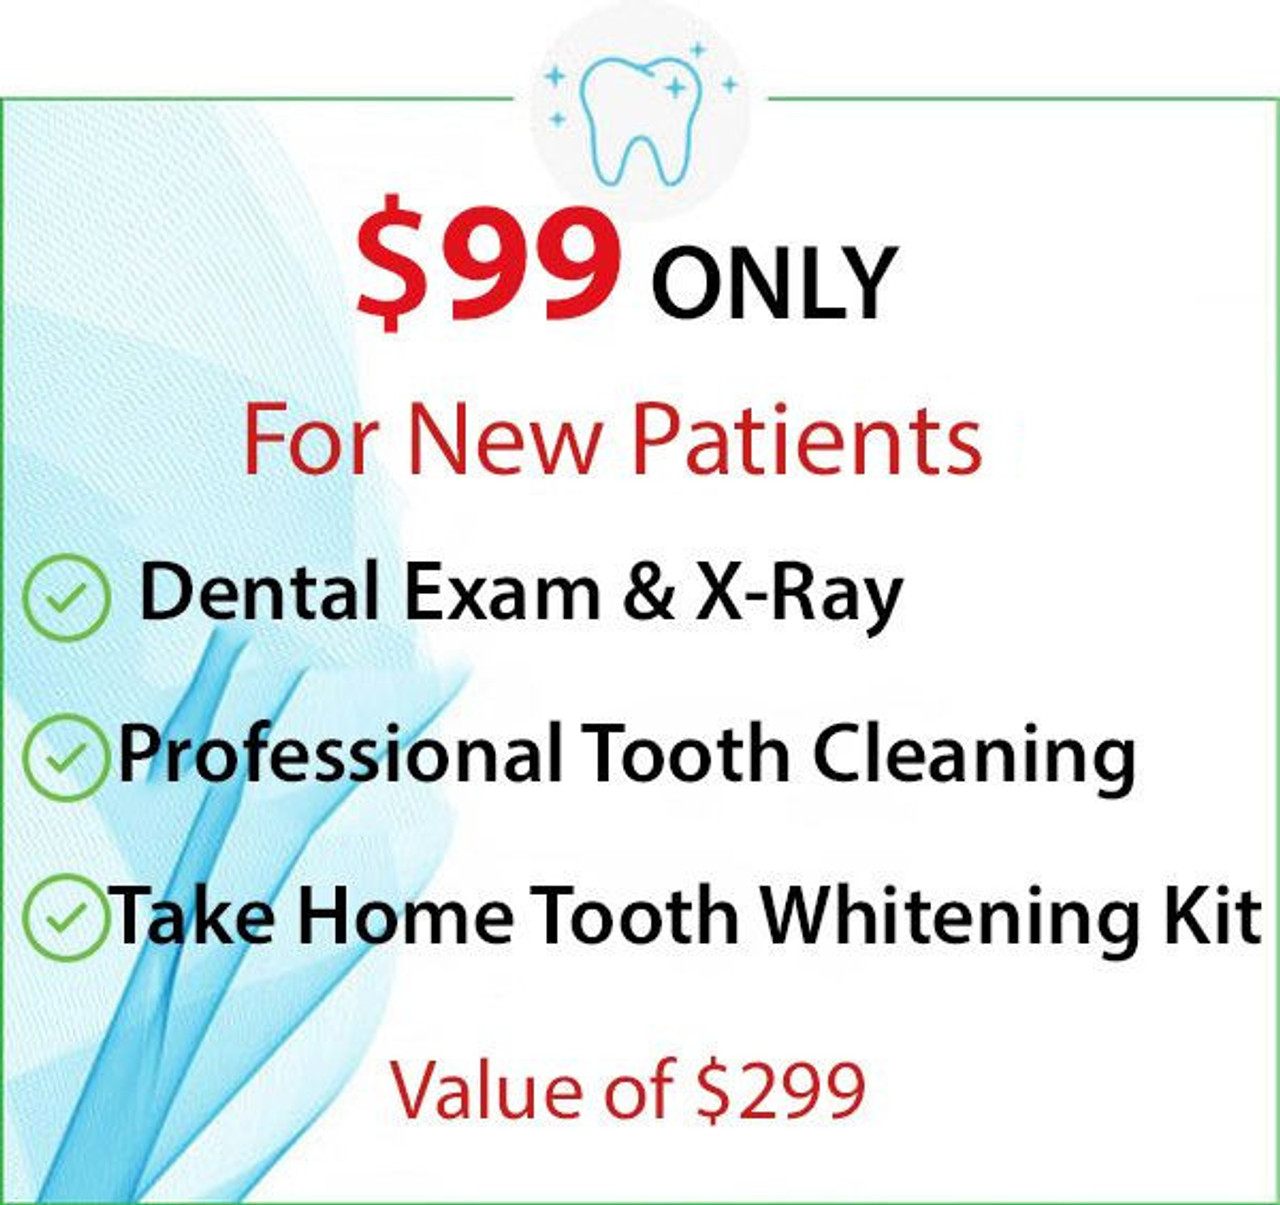 Free dental care product offers